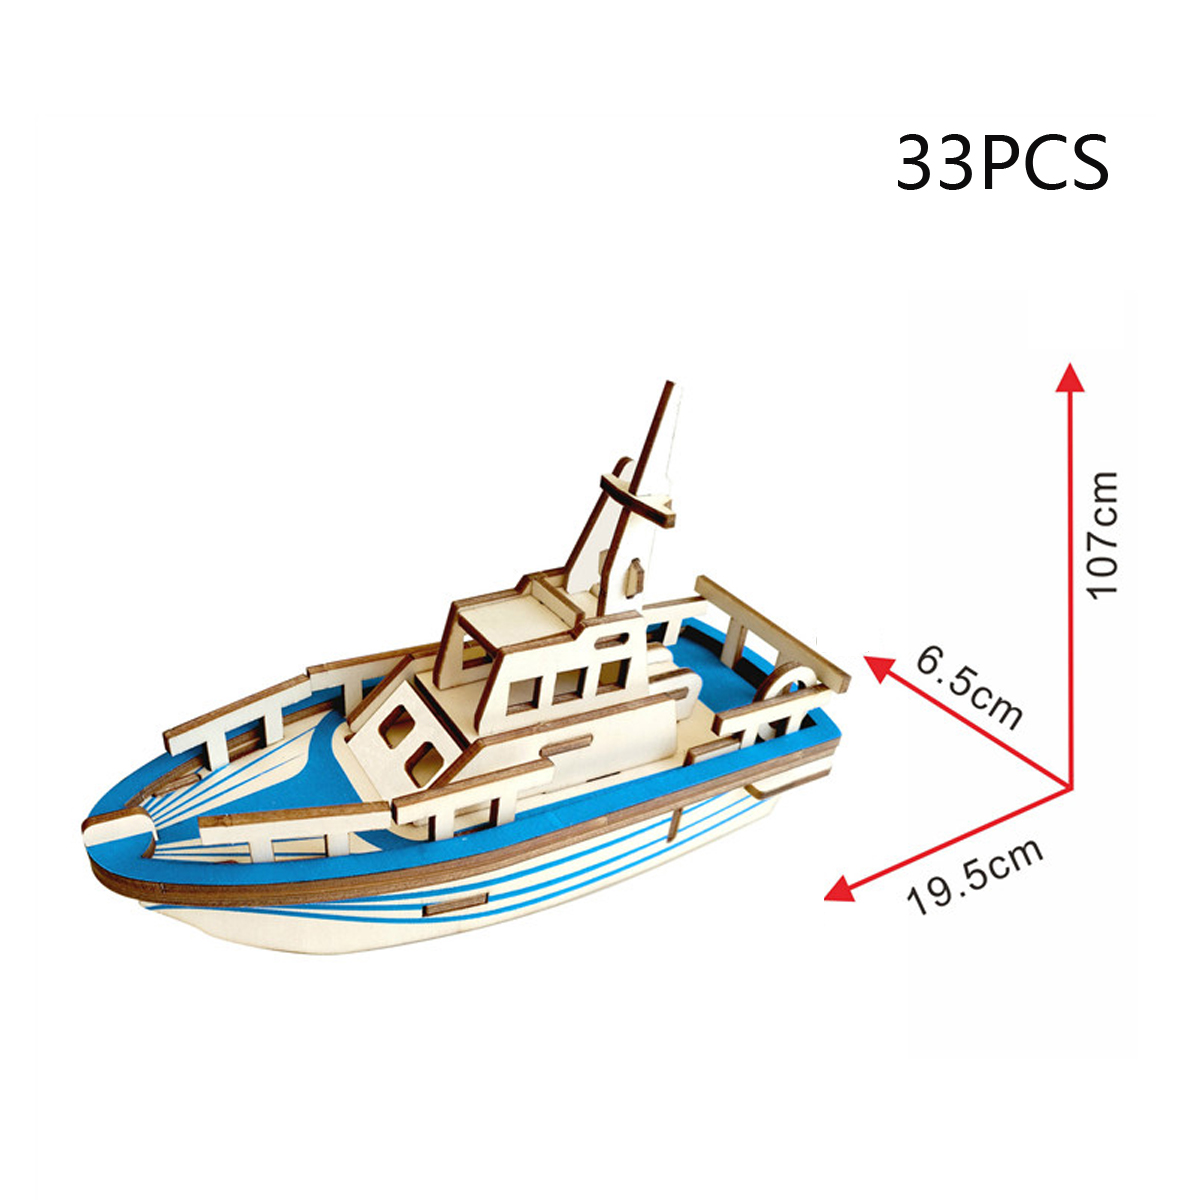 3D-Woodcraft-Assembly-Battleship-Series-Kit-Jigsaw-Puzzle-Toy-Decoration-Model-for-Kids-Gift-1632733-8